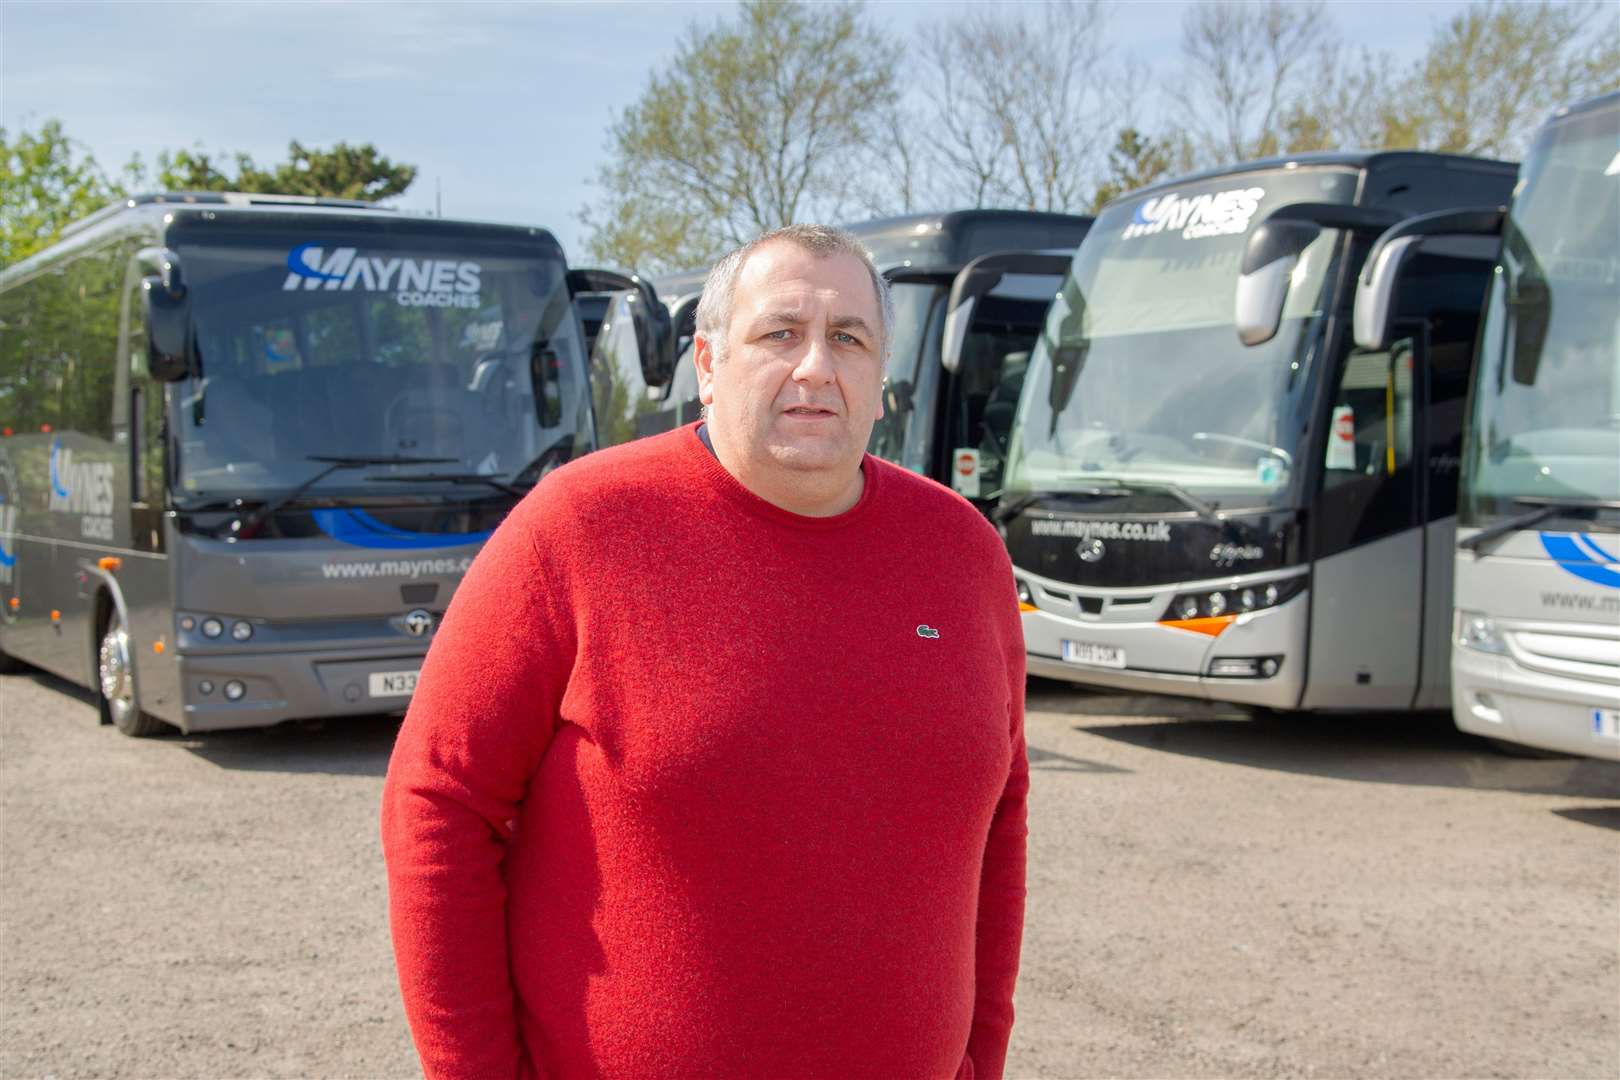 Mayne's Coaches operations director Kevin Mayne is delighted with the new funding for the coach industry. Picture: Daniel Forsyth